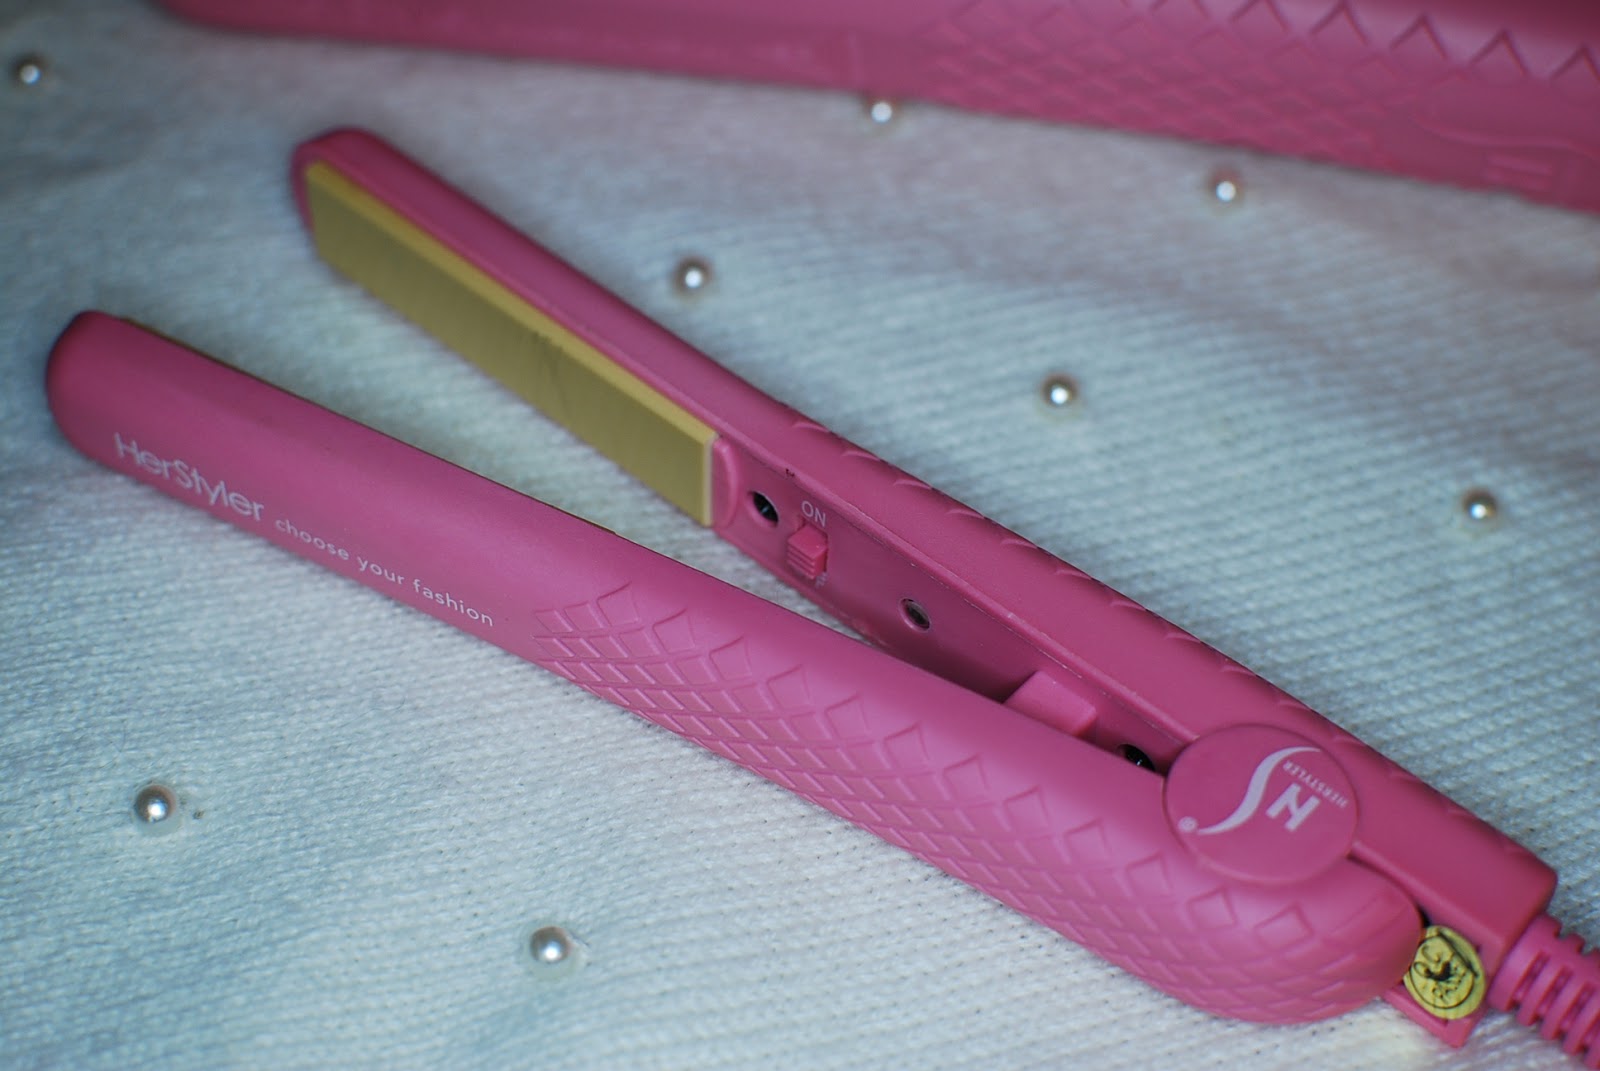 My Darling Rainbow: Herstyler~ Curling Iron and Straightener Review